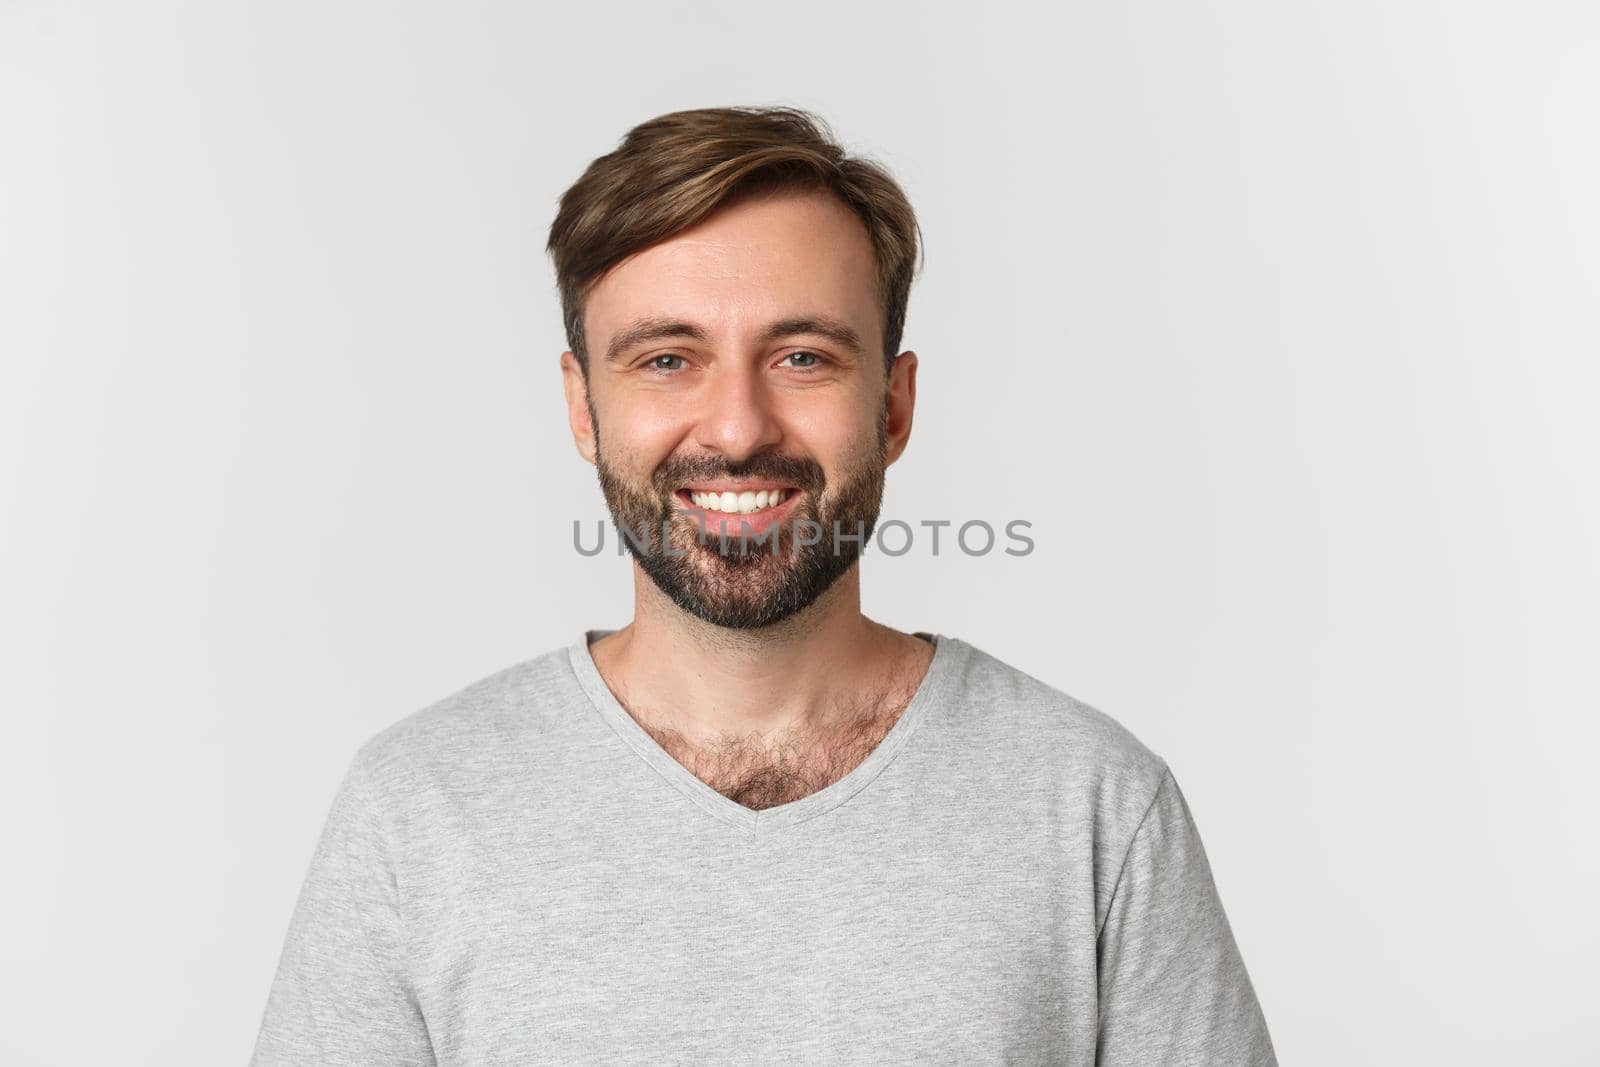 Close-up of handsome adult man with beard, wearing gray t-shirt, smiling happy, standing over white background.